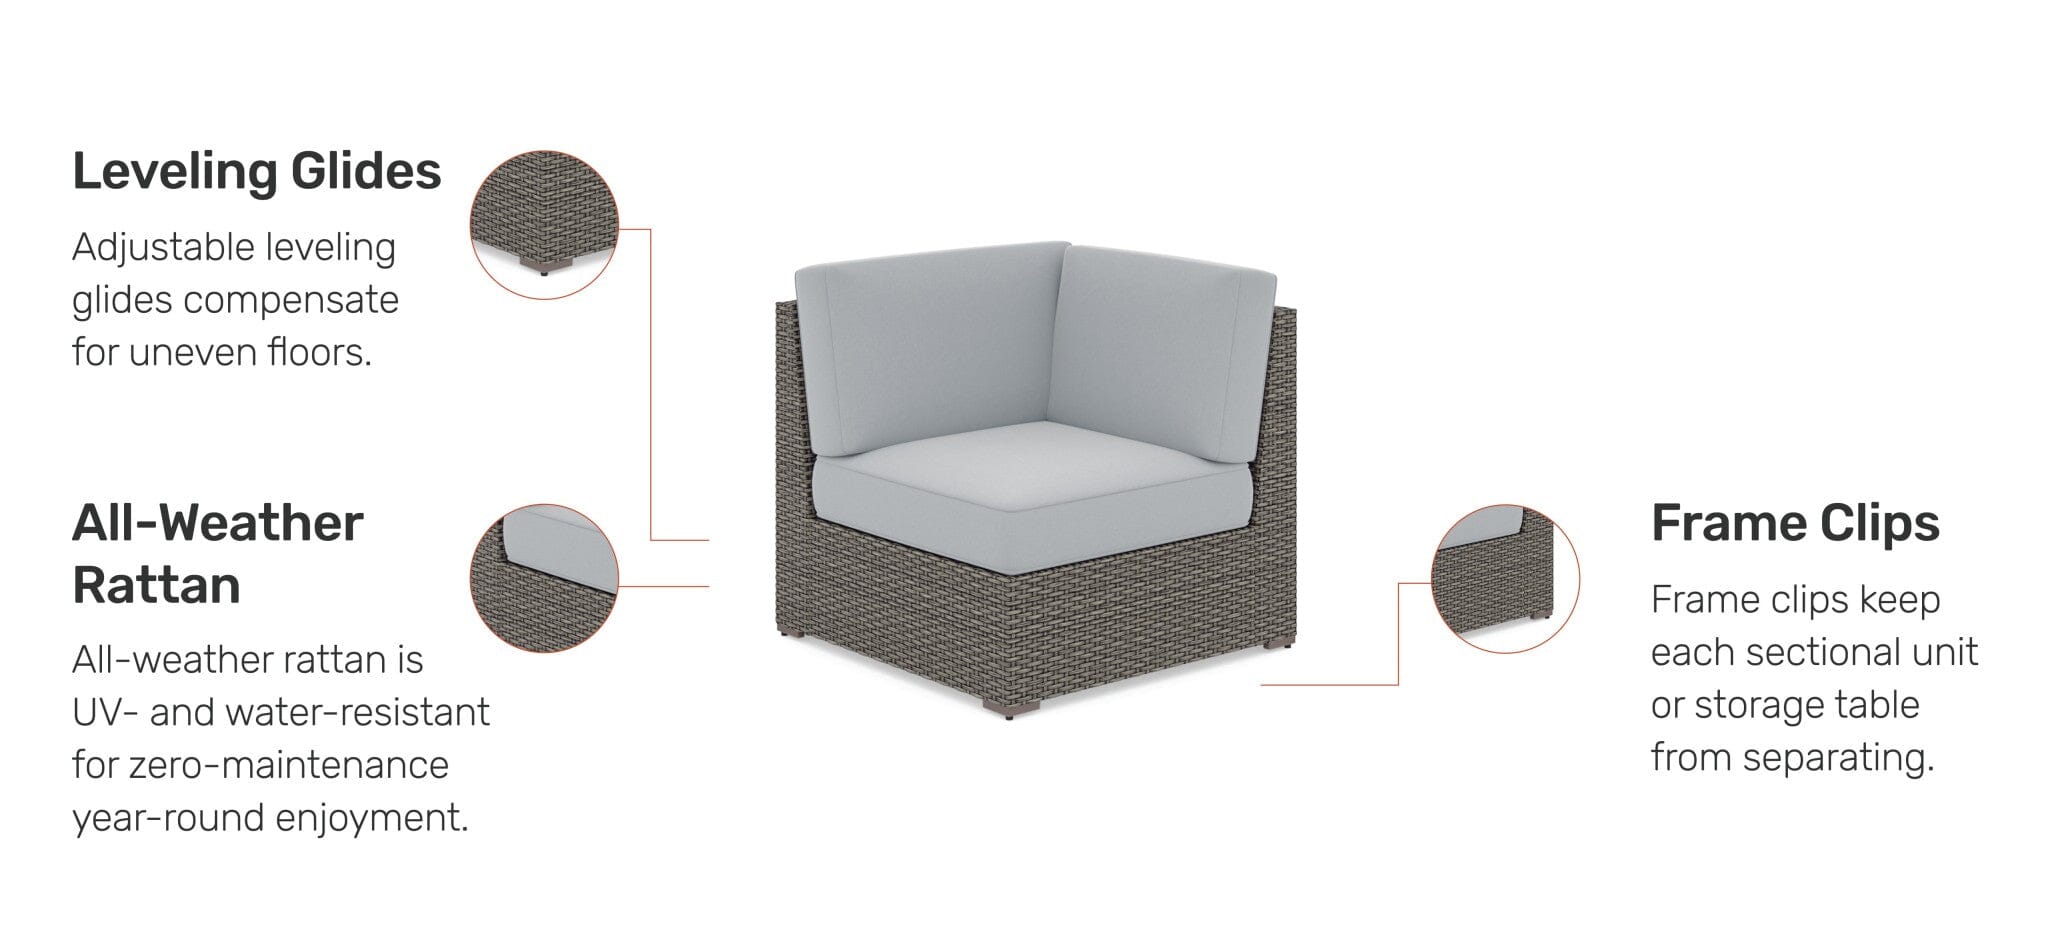 Modern & Contemporary Outdoor Sectional Side Chair By Boca Raton Outdoor Seating Boca Raton